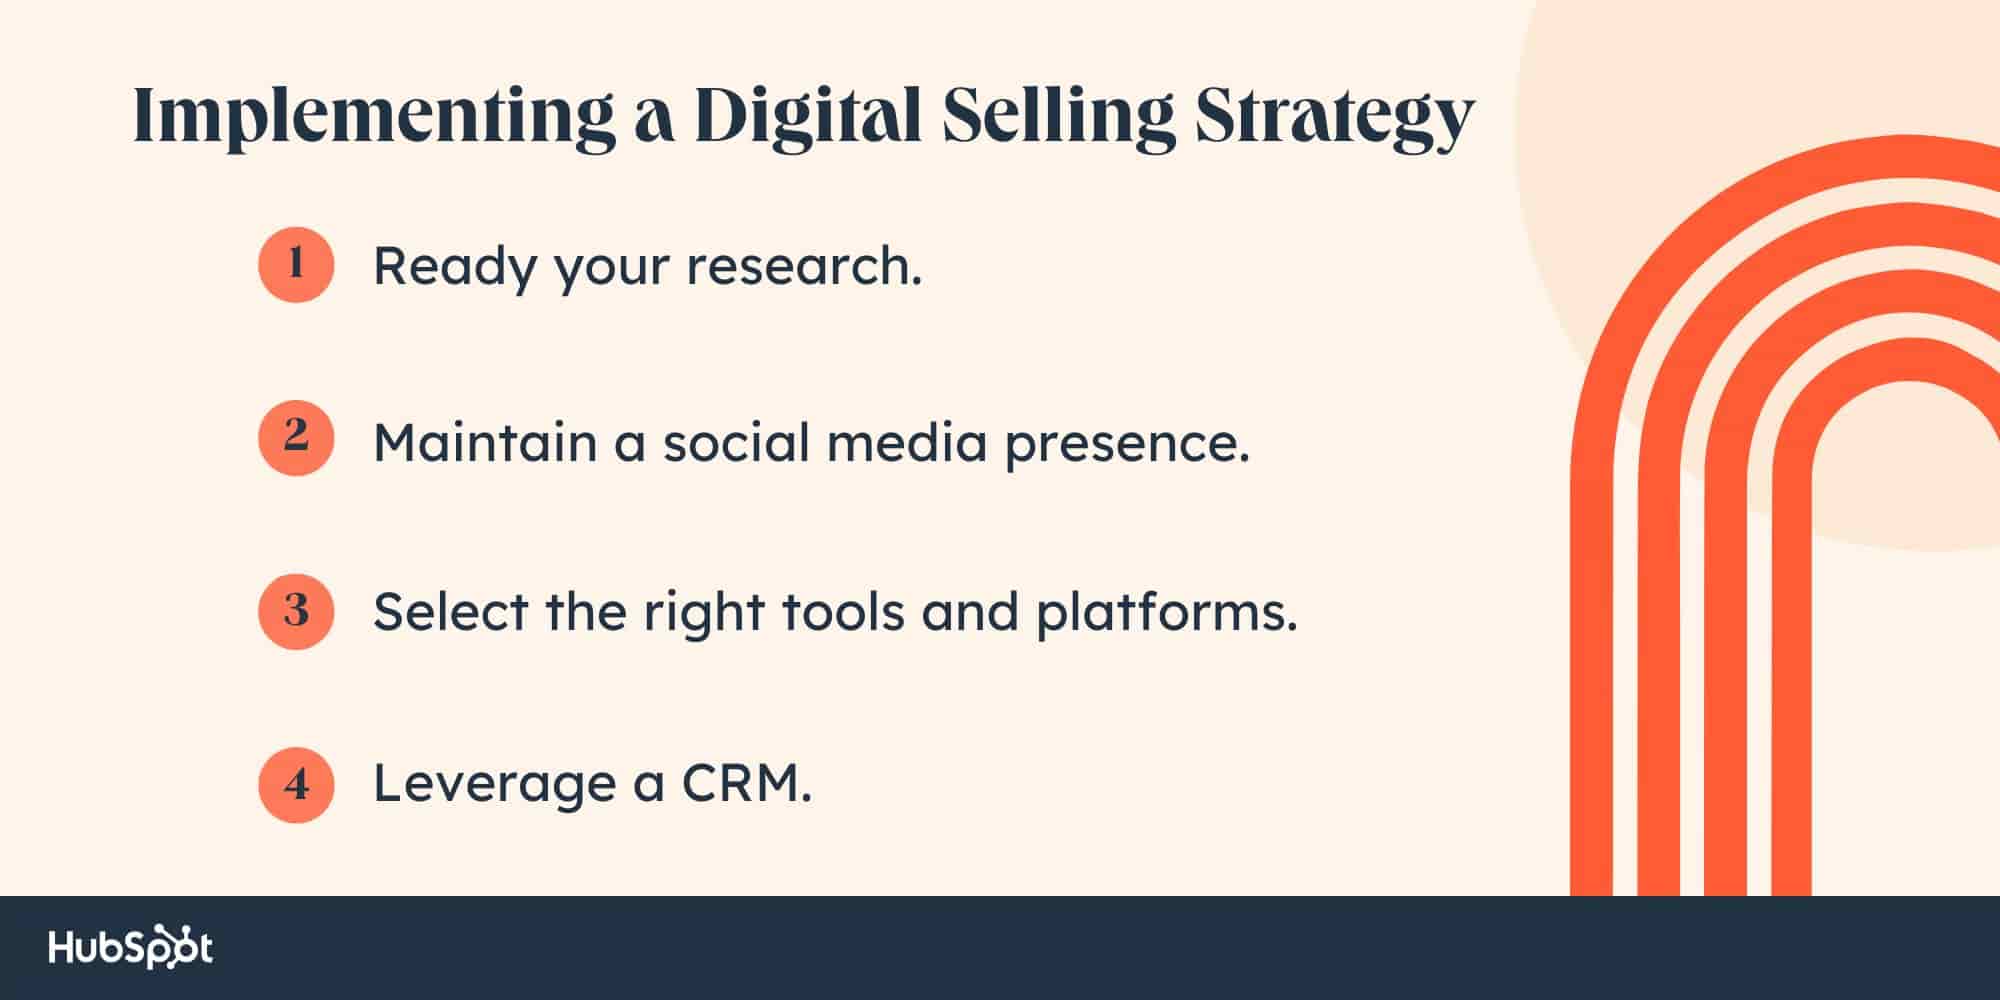 Implementing a Digital Selling Strategy. Ready your research. Maintain a social media presence. Select the right tools and platforms. Leverage a CRM.